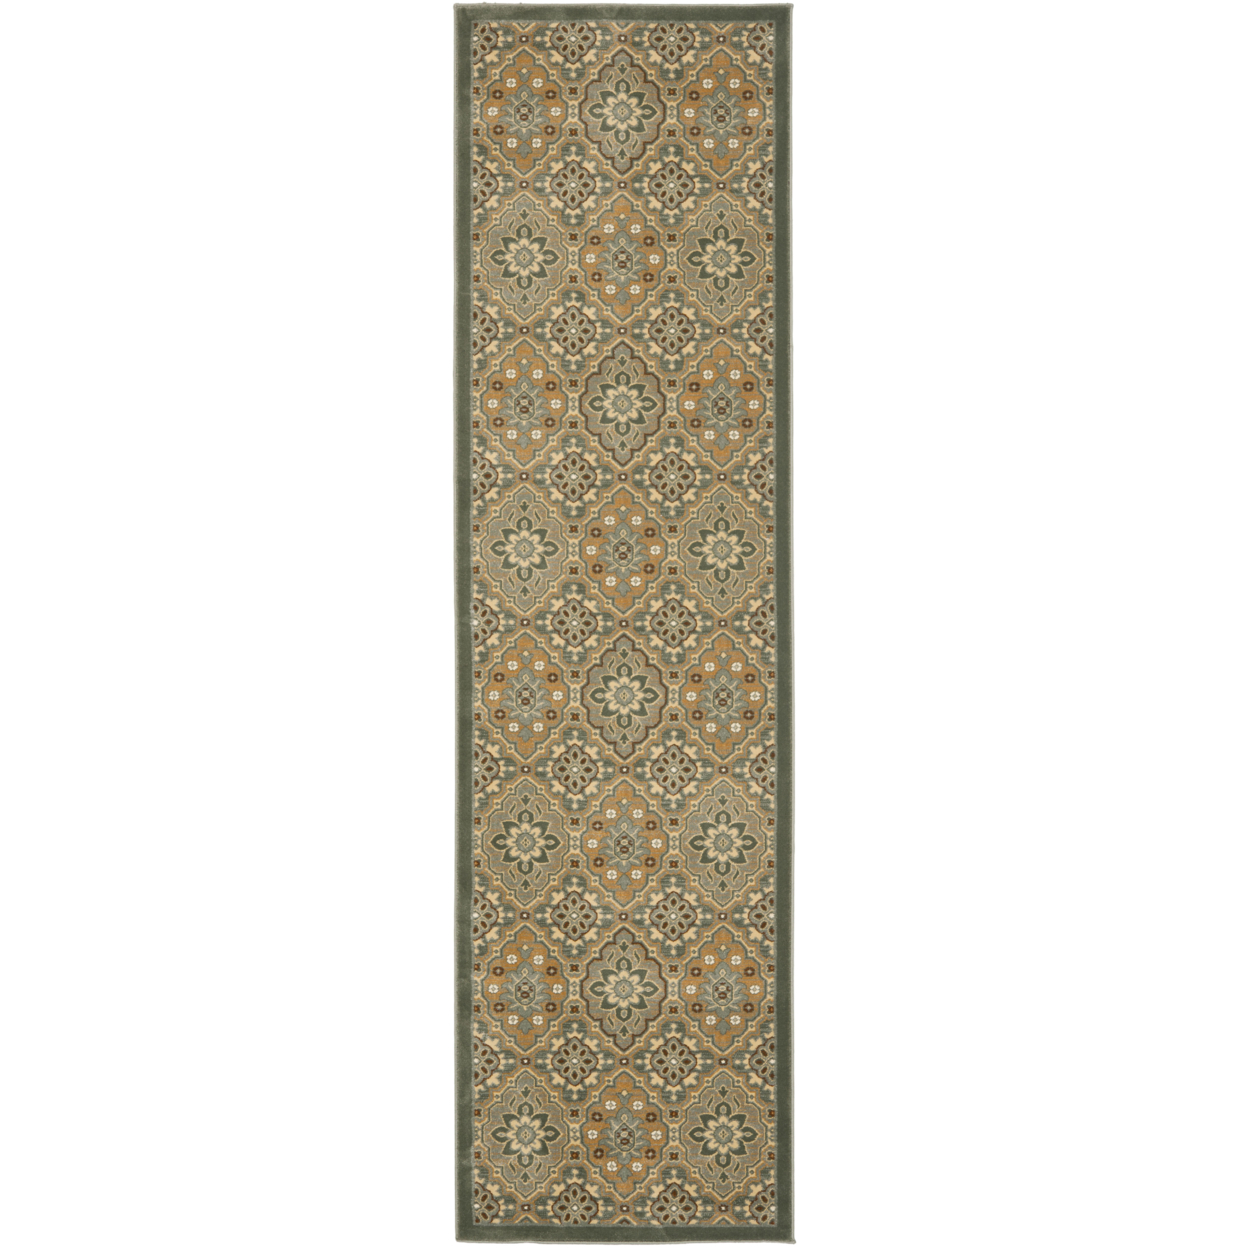 SAFAVIEH Treasures Collection TRE217-6520 Blue / Gold Rug - 4' X 6'